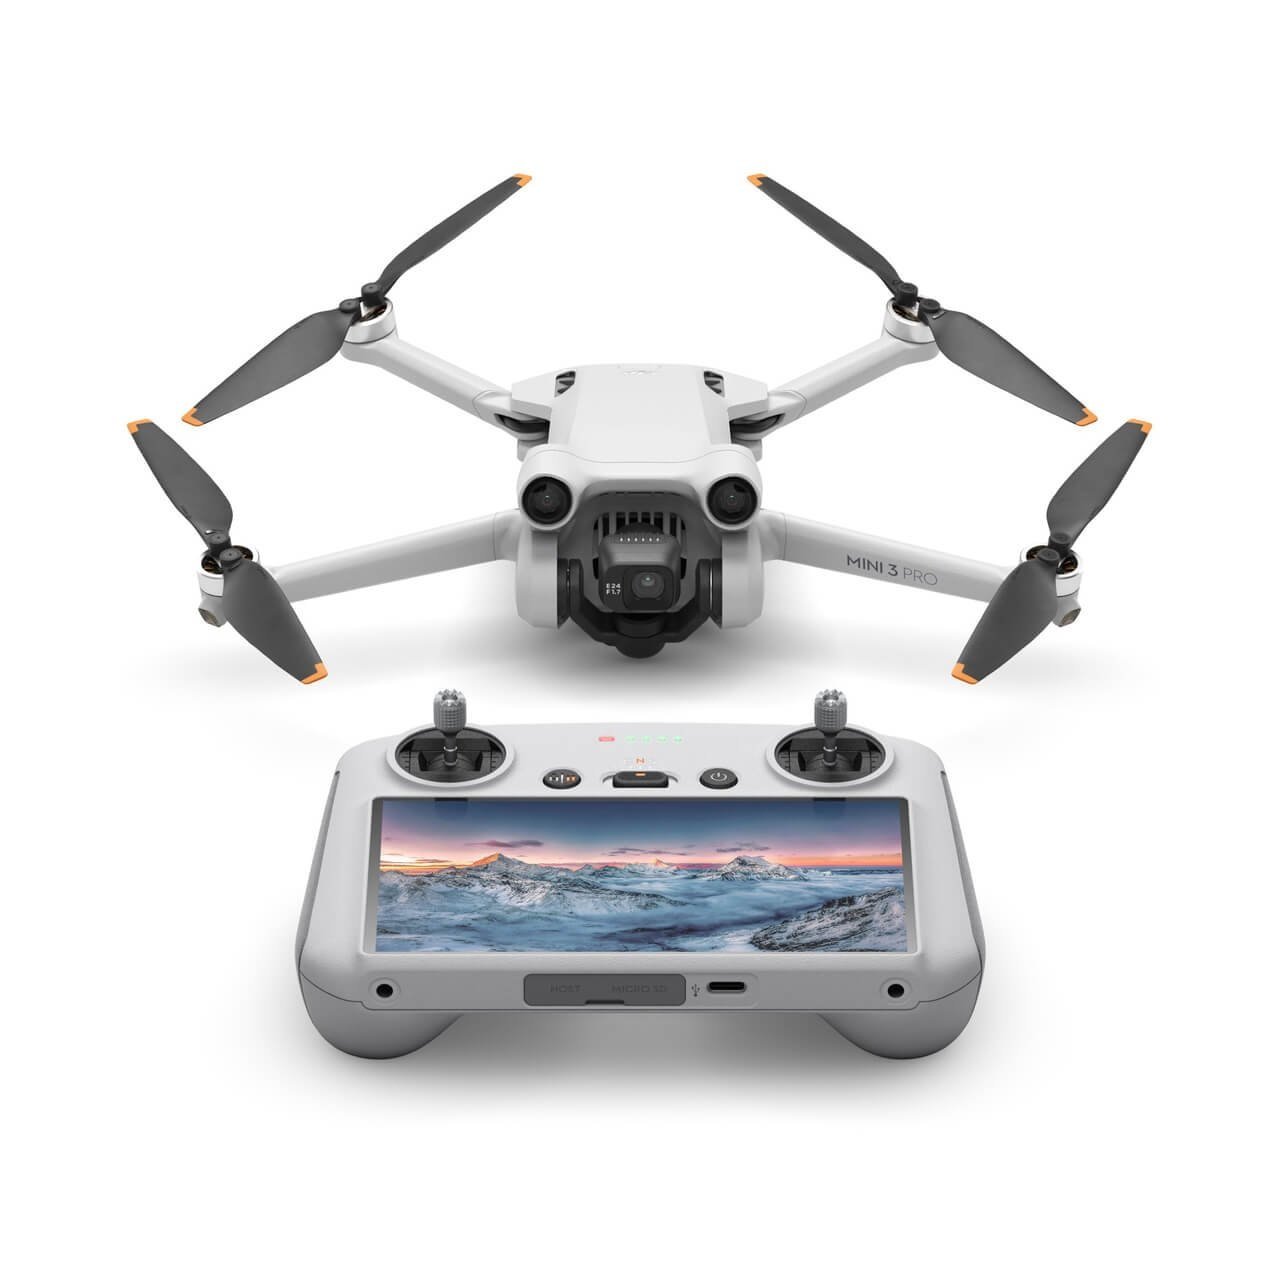 DJI Mini 3 Pro with DJI Smart Control – Lightweight and Foldable Camera Drone with 4K/60fps Video, 48 MP Photo, 34-min Flight Time